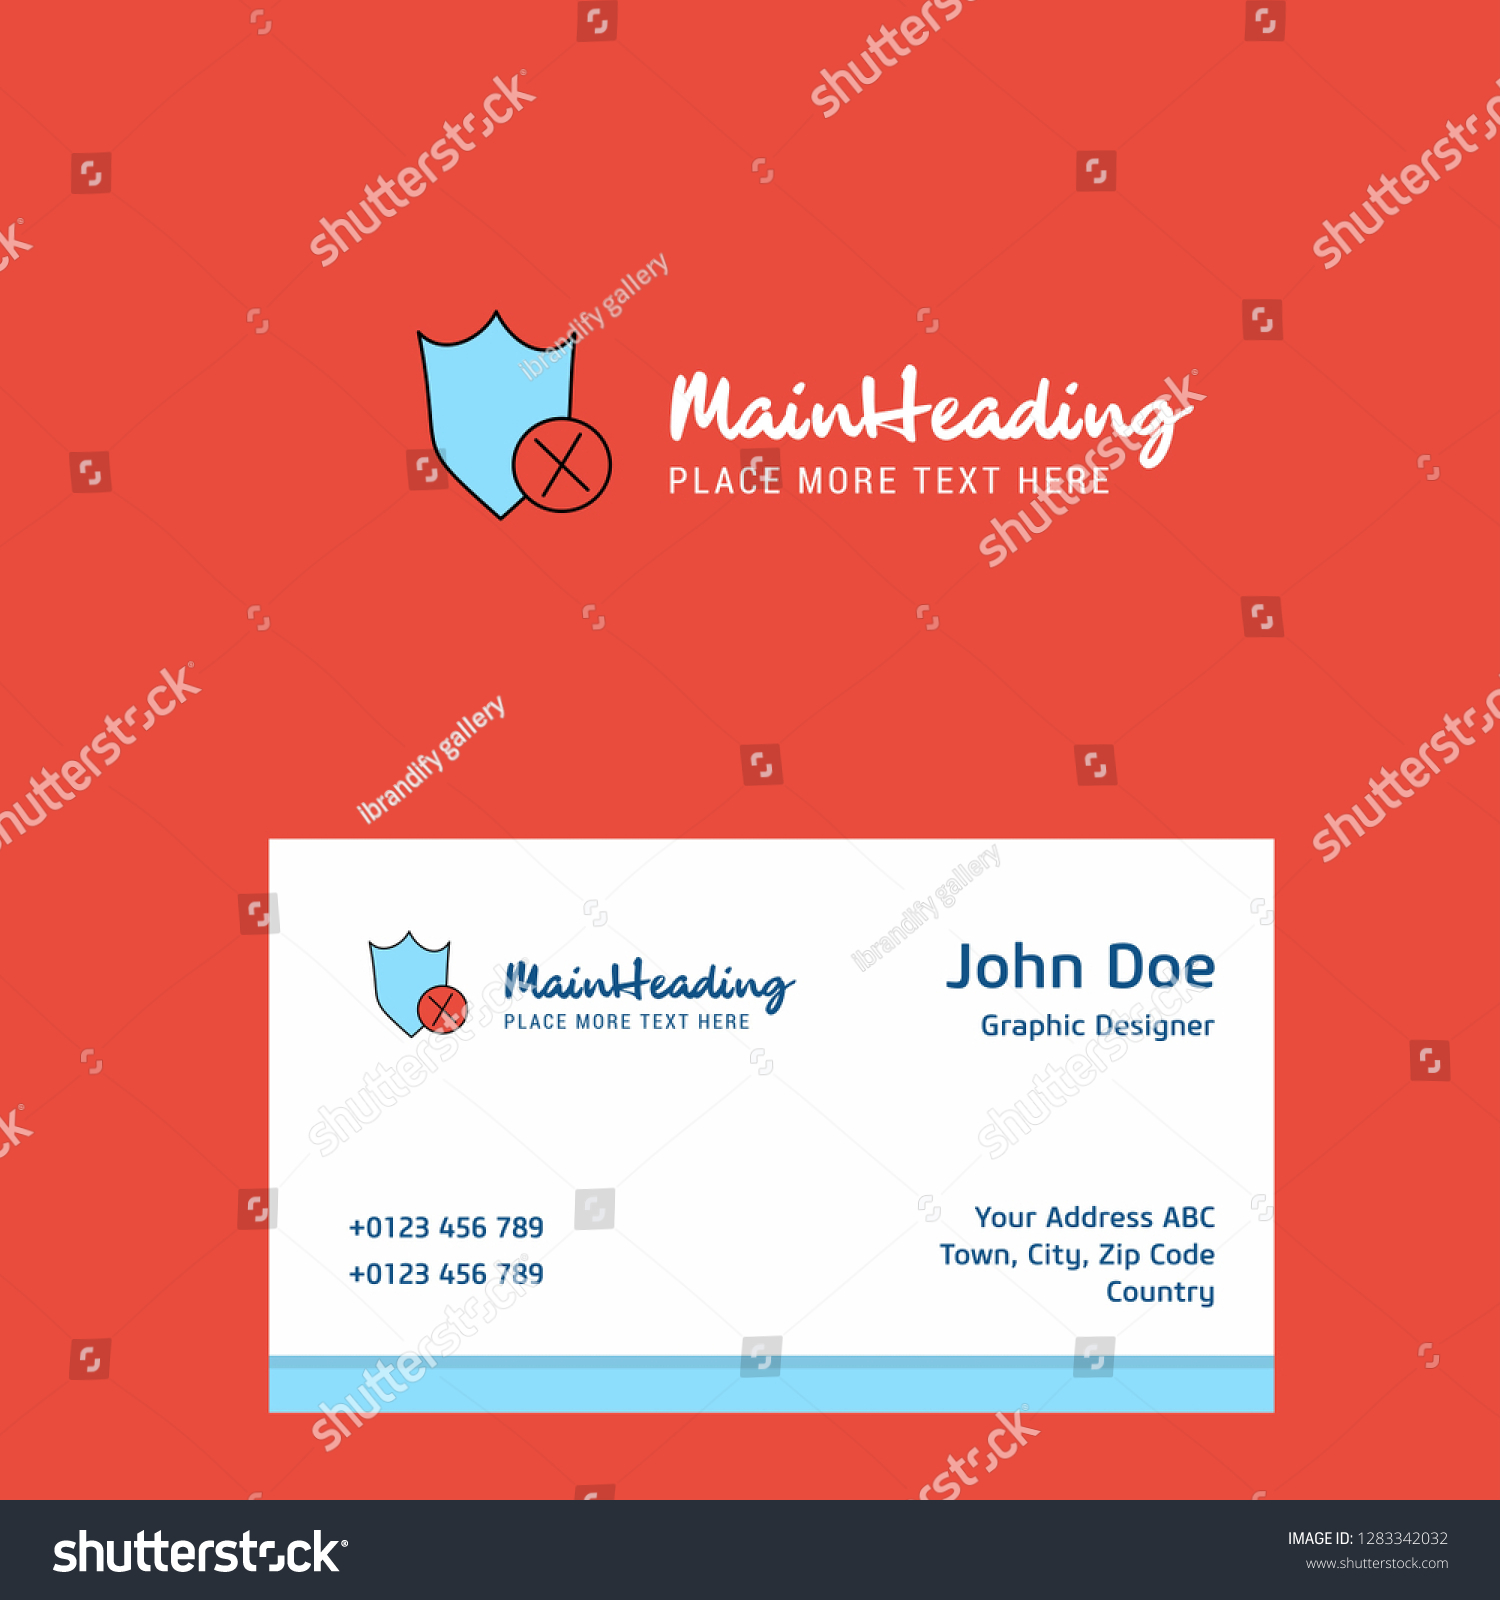 Shield Logo Design Business Card Template | Royalty Free With Regard To Shield Id Card Template